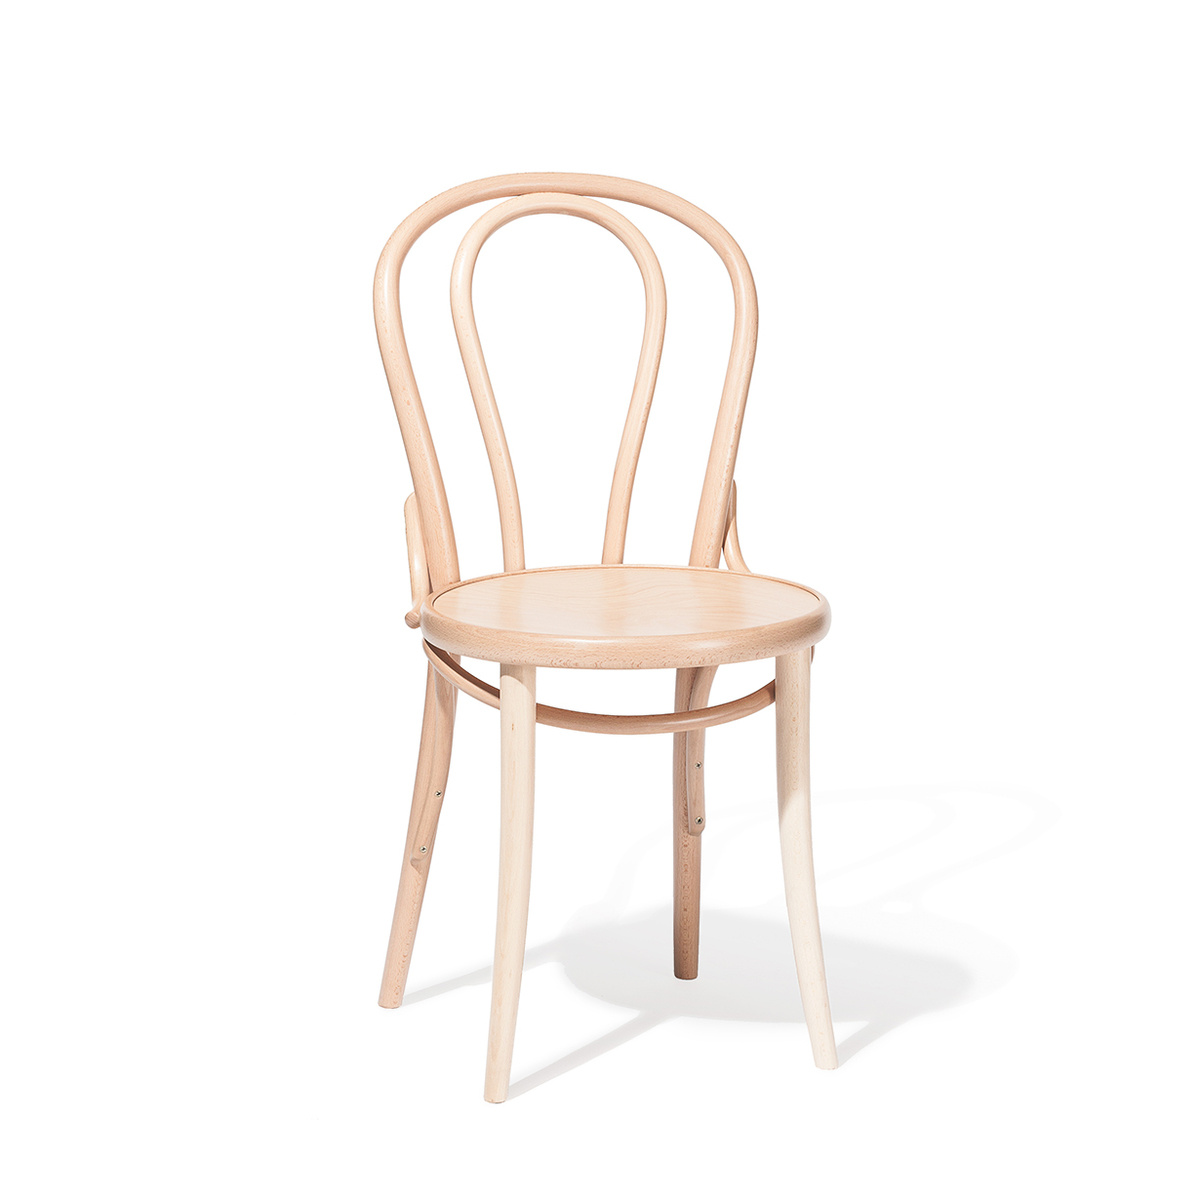 Chair 18 - Natural by Ton |